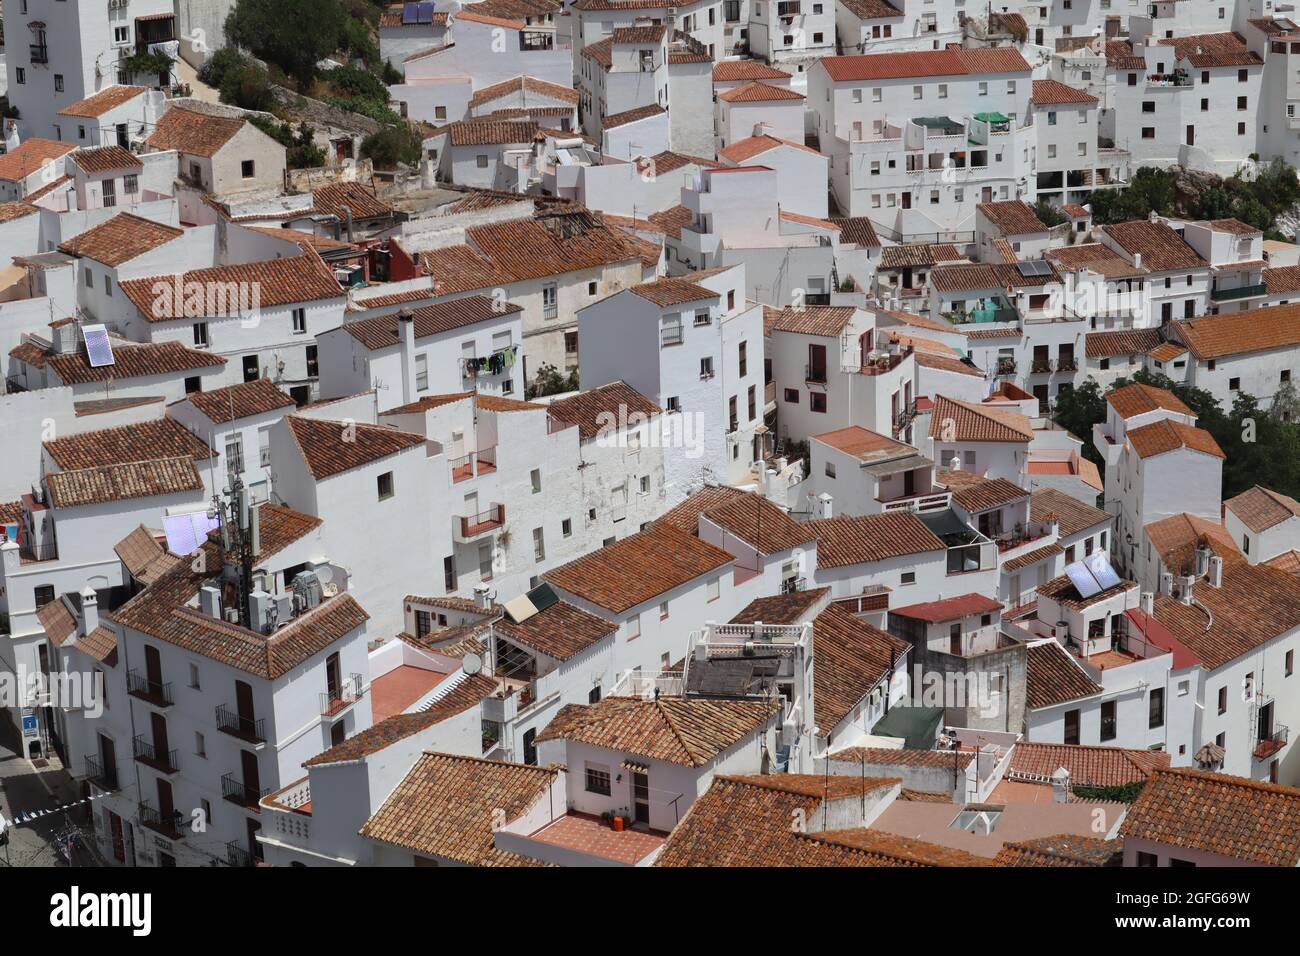 White Spanish village of Casares (Malaga) full of white-washed houses, narrow, steep and winding streets Stock Photo